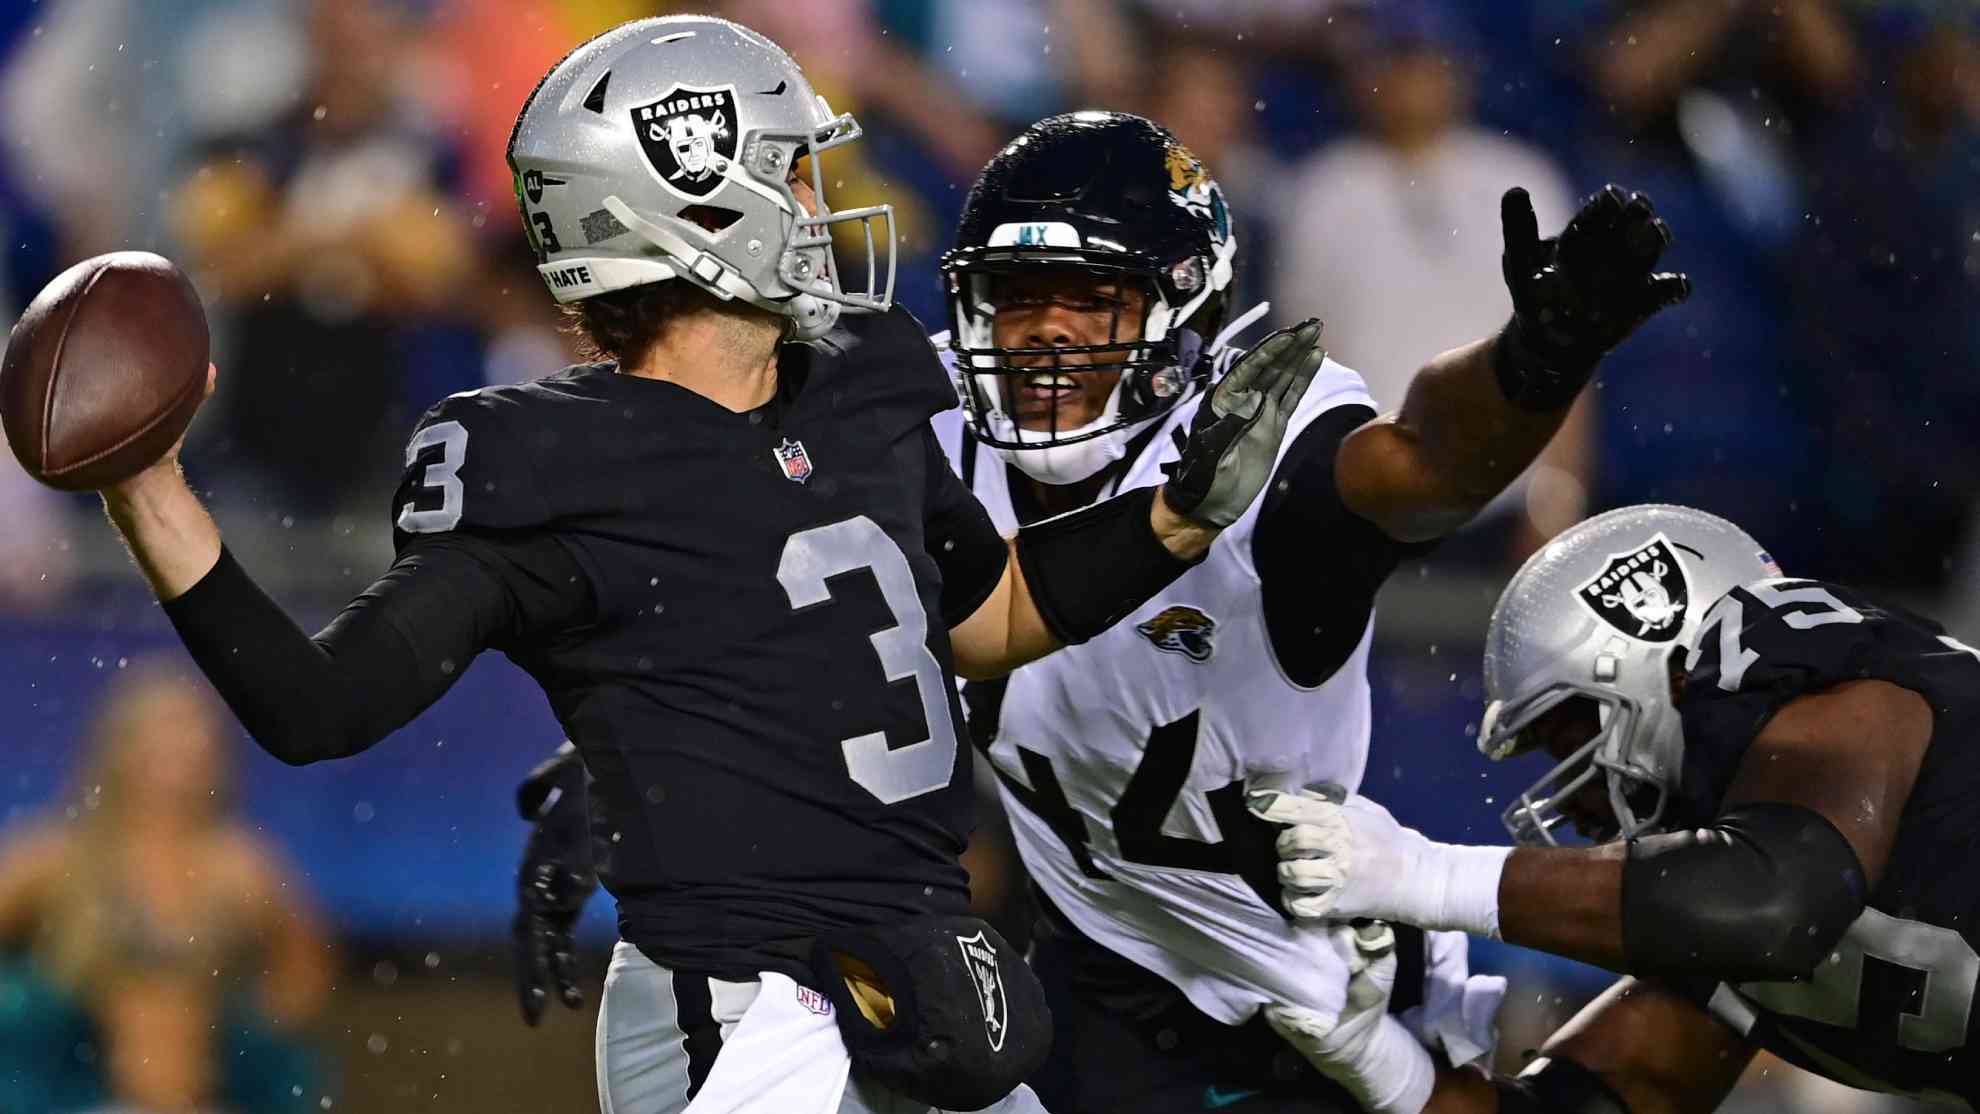 Raiders 27-11 Jaguars: Final score and highlights